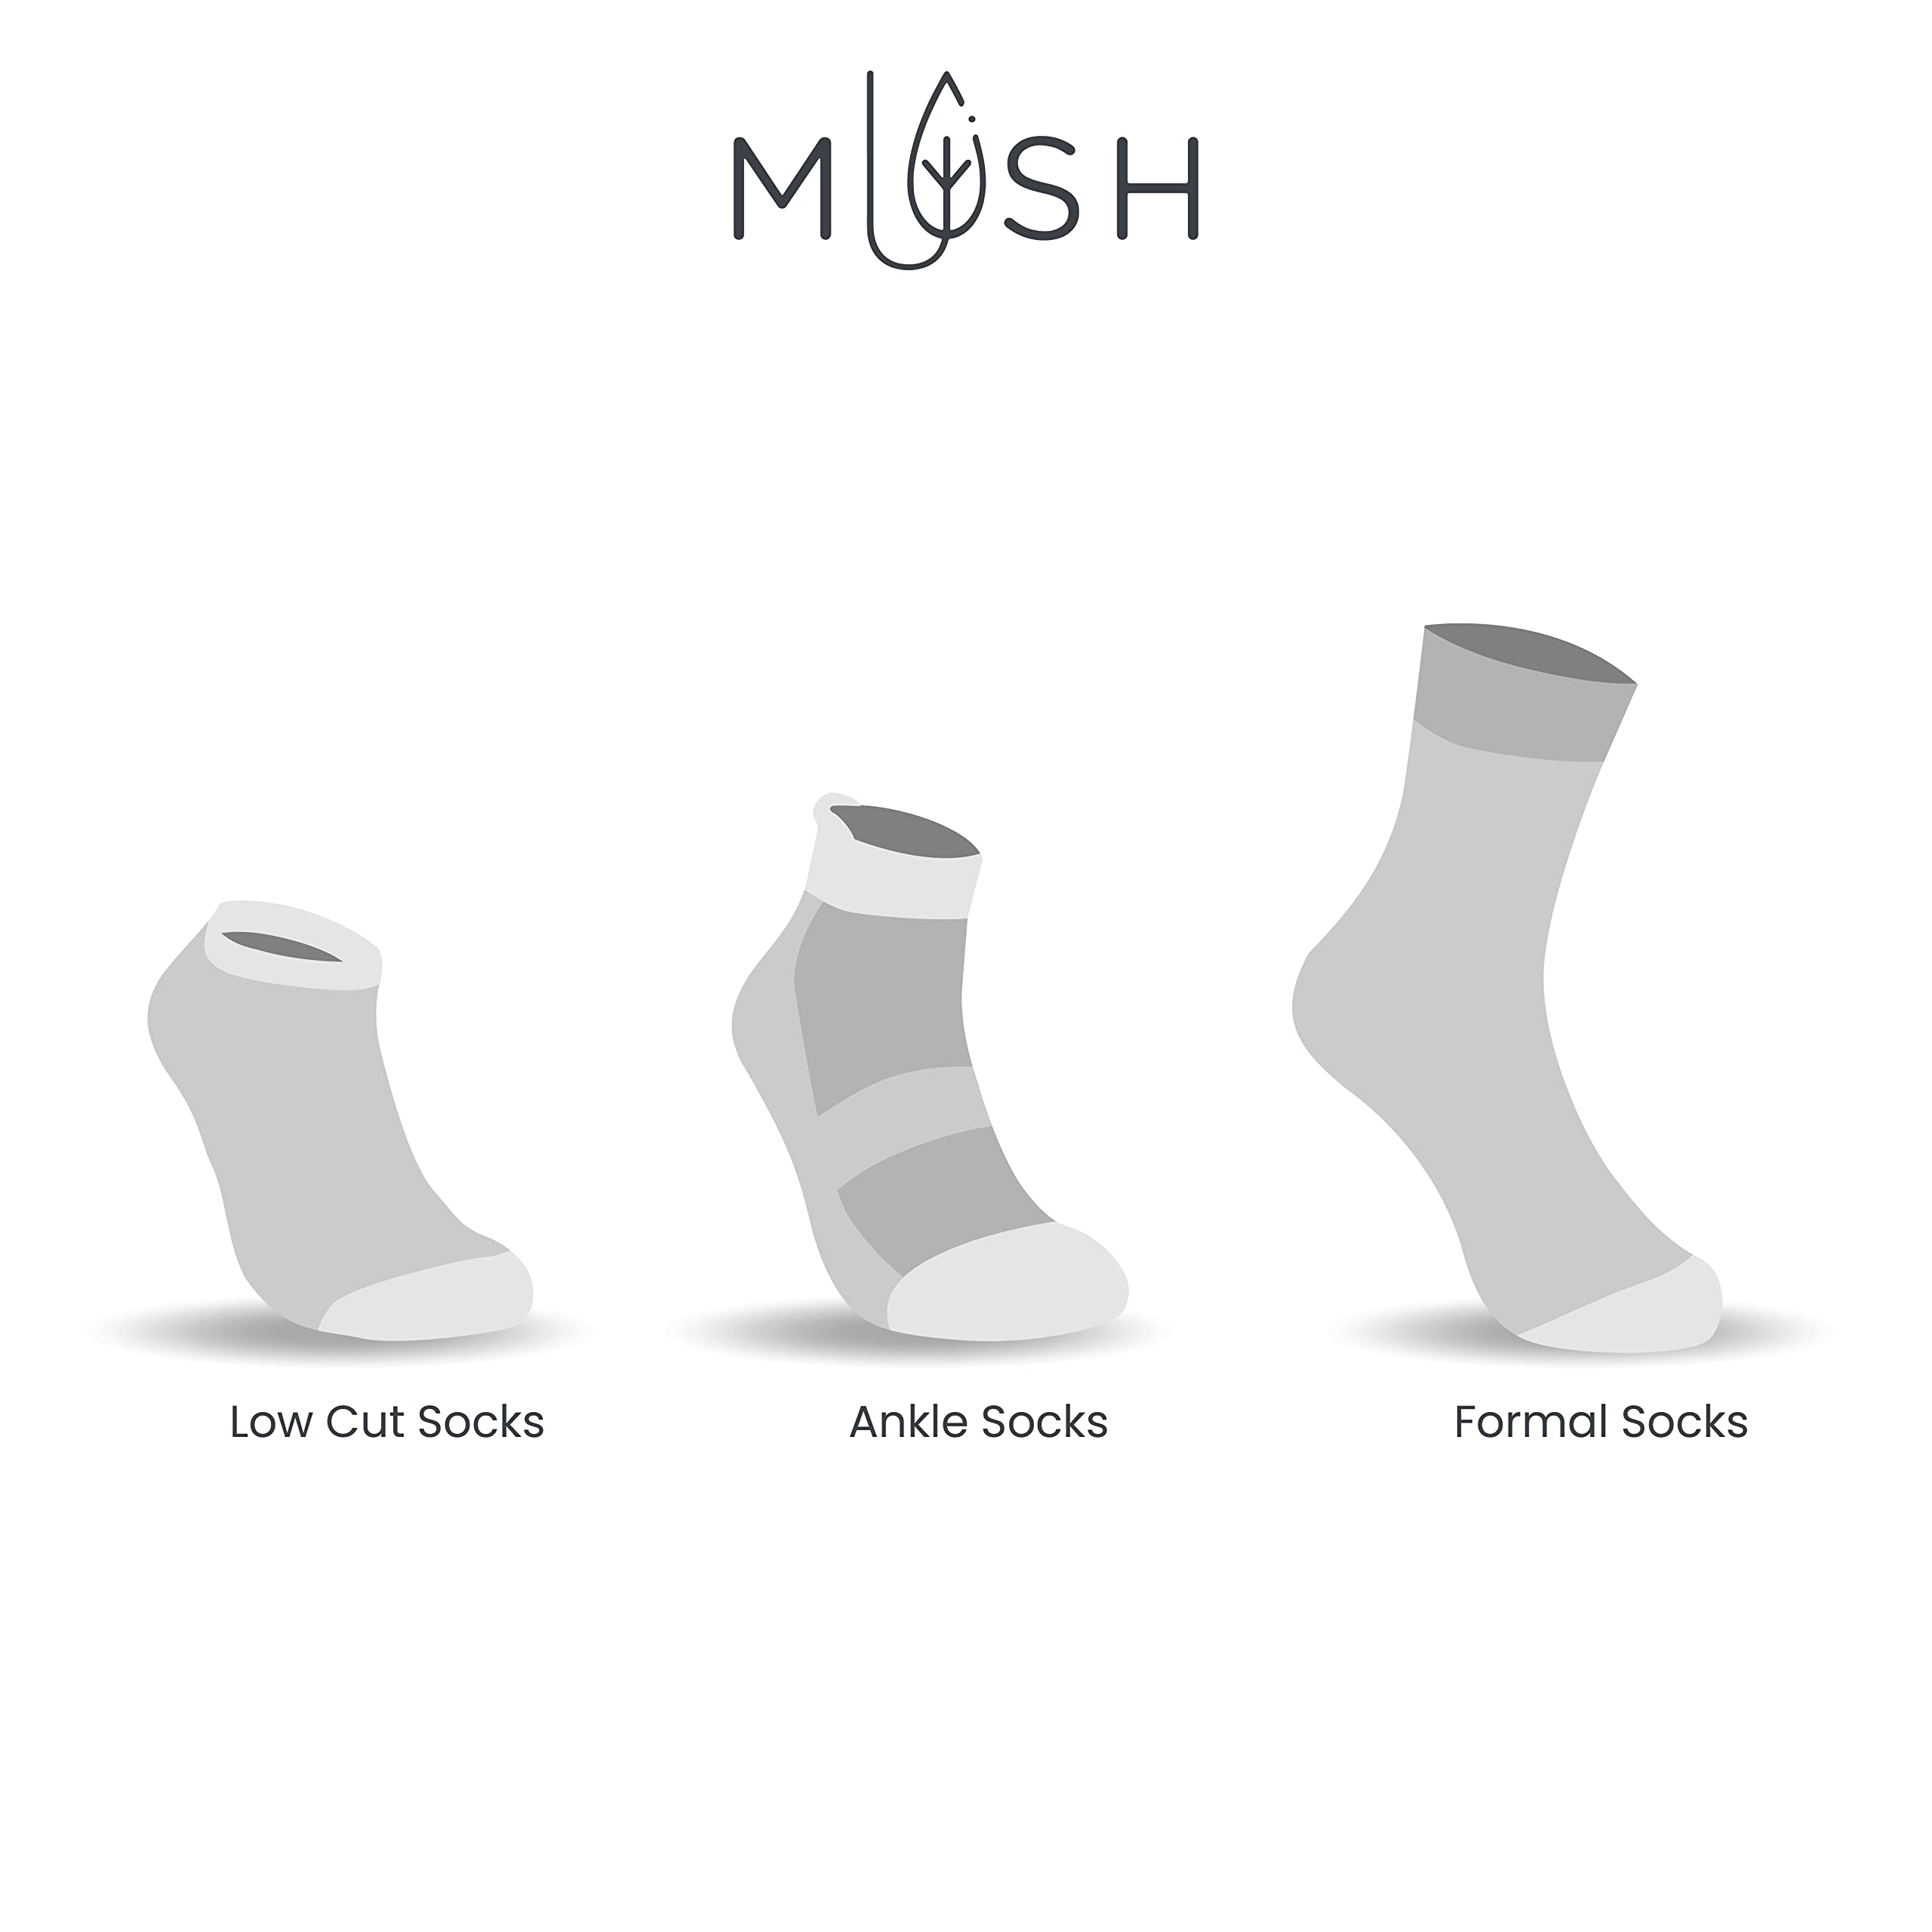 Mush Bamboo Socks for Sports & Casual Wear- Ultra Soft, Anti Odor, Breathable Mesh Design Low Cut Ankle Length Pack of 3 , (Navy, Charcoal green, Sea green,) UK Size 6-10